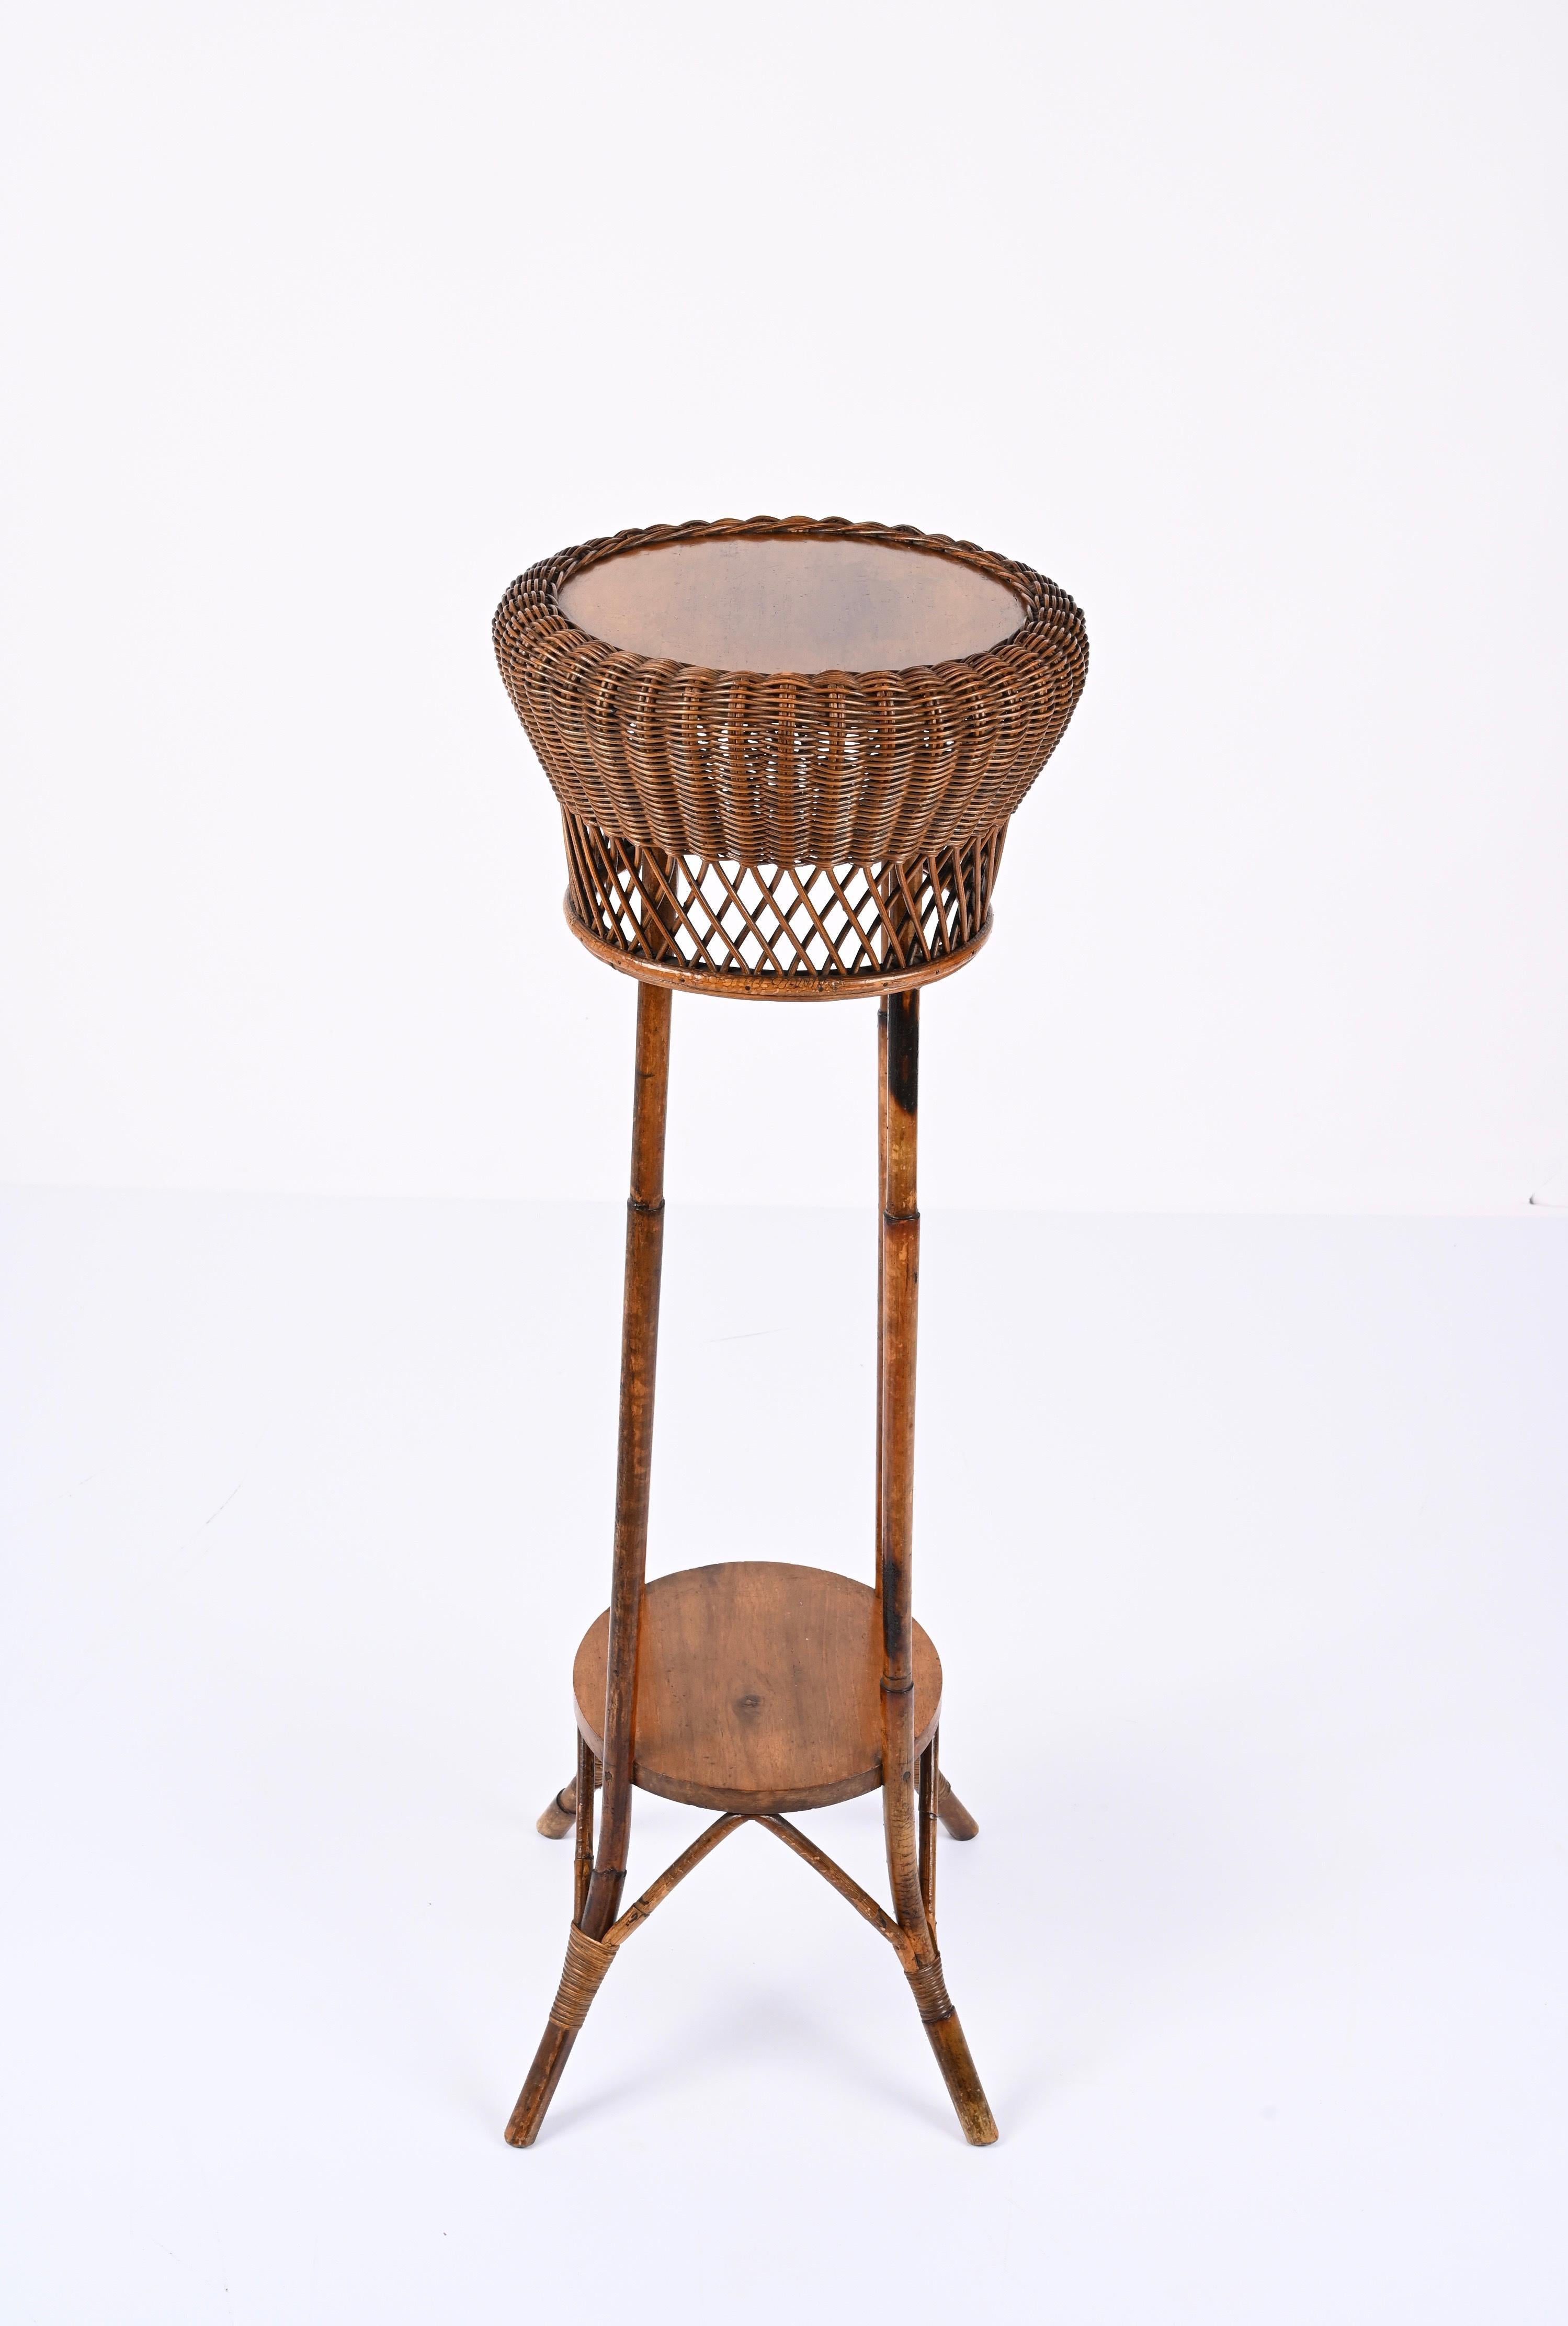 20th Century Midcentury Double-Levelled Circular Rattan and Bamboo Italian Pedestal, 1950s For Sale